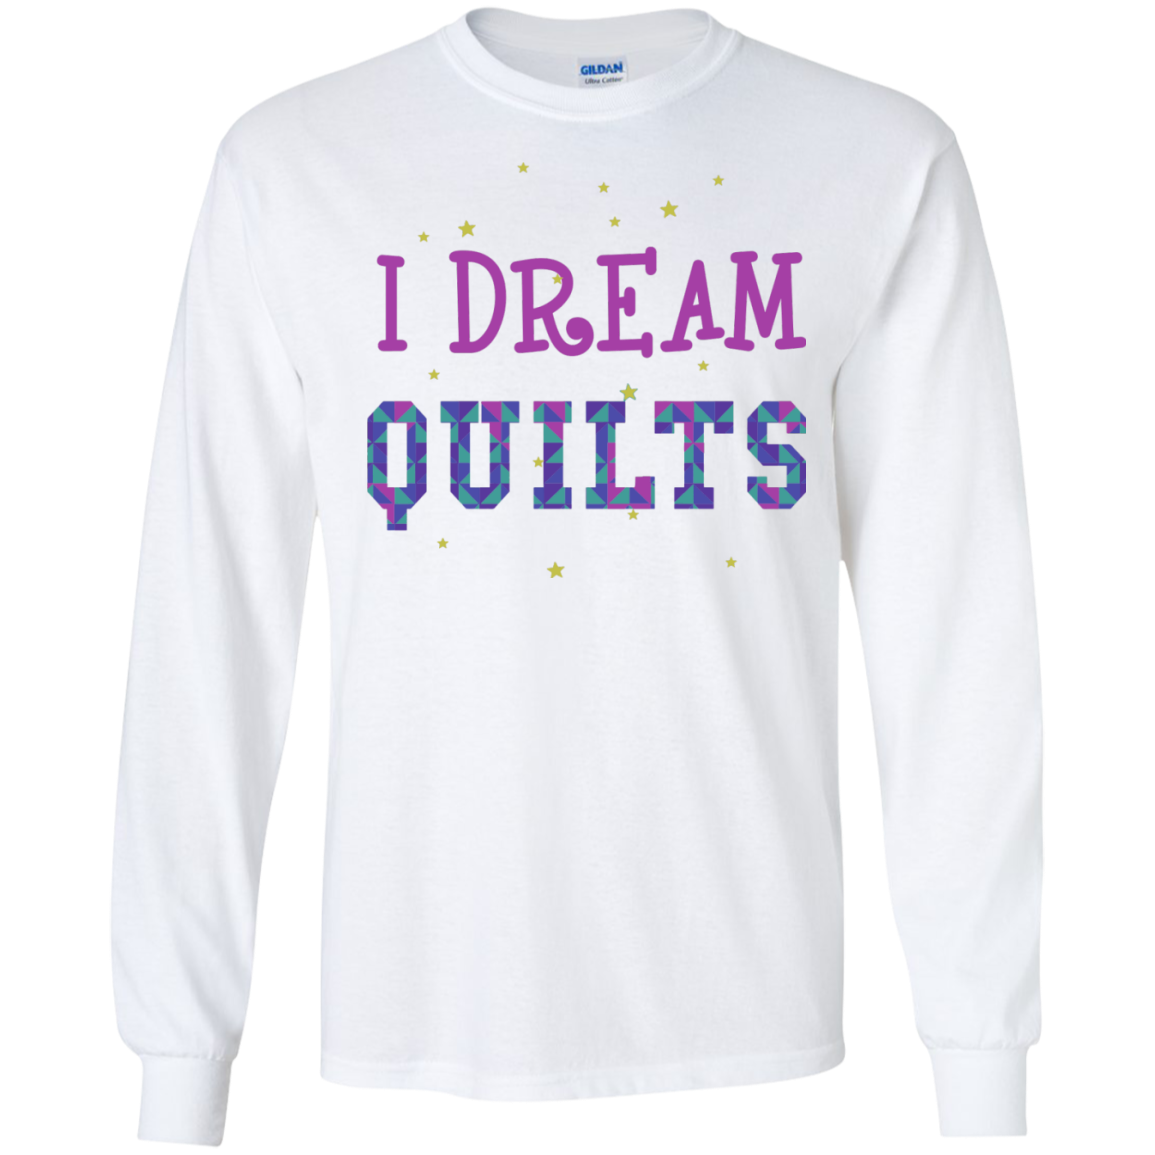 I Dream Quilts Long Sleeve Ultra Cotton T-Shirt - Crafter4Life - 2